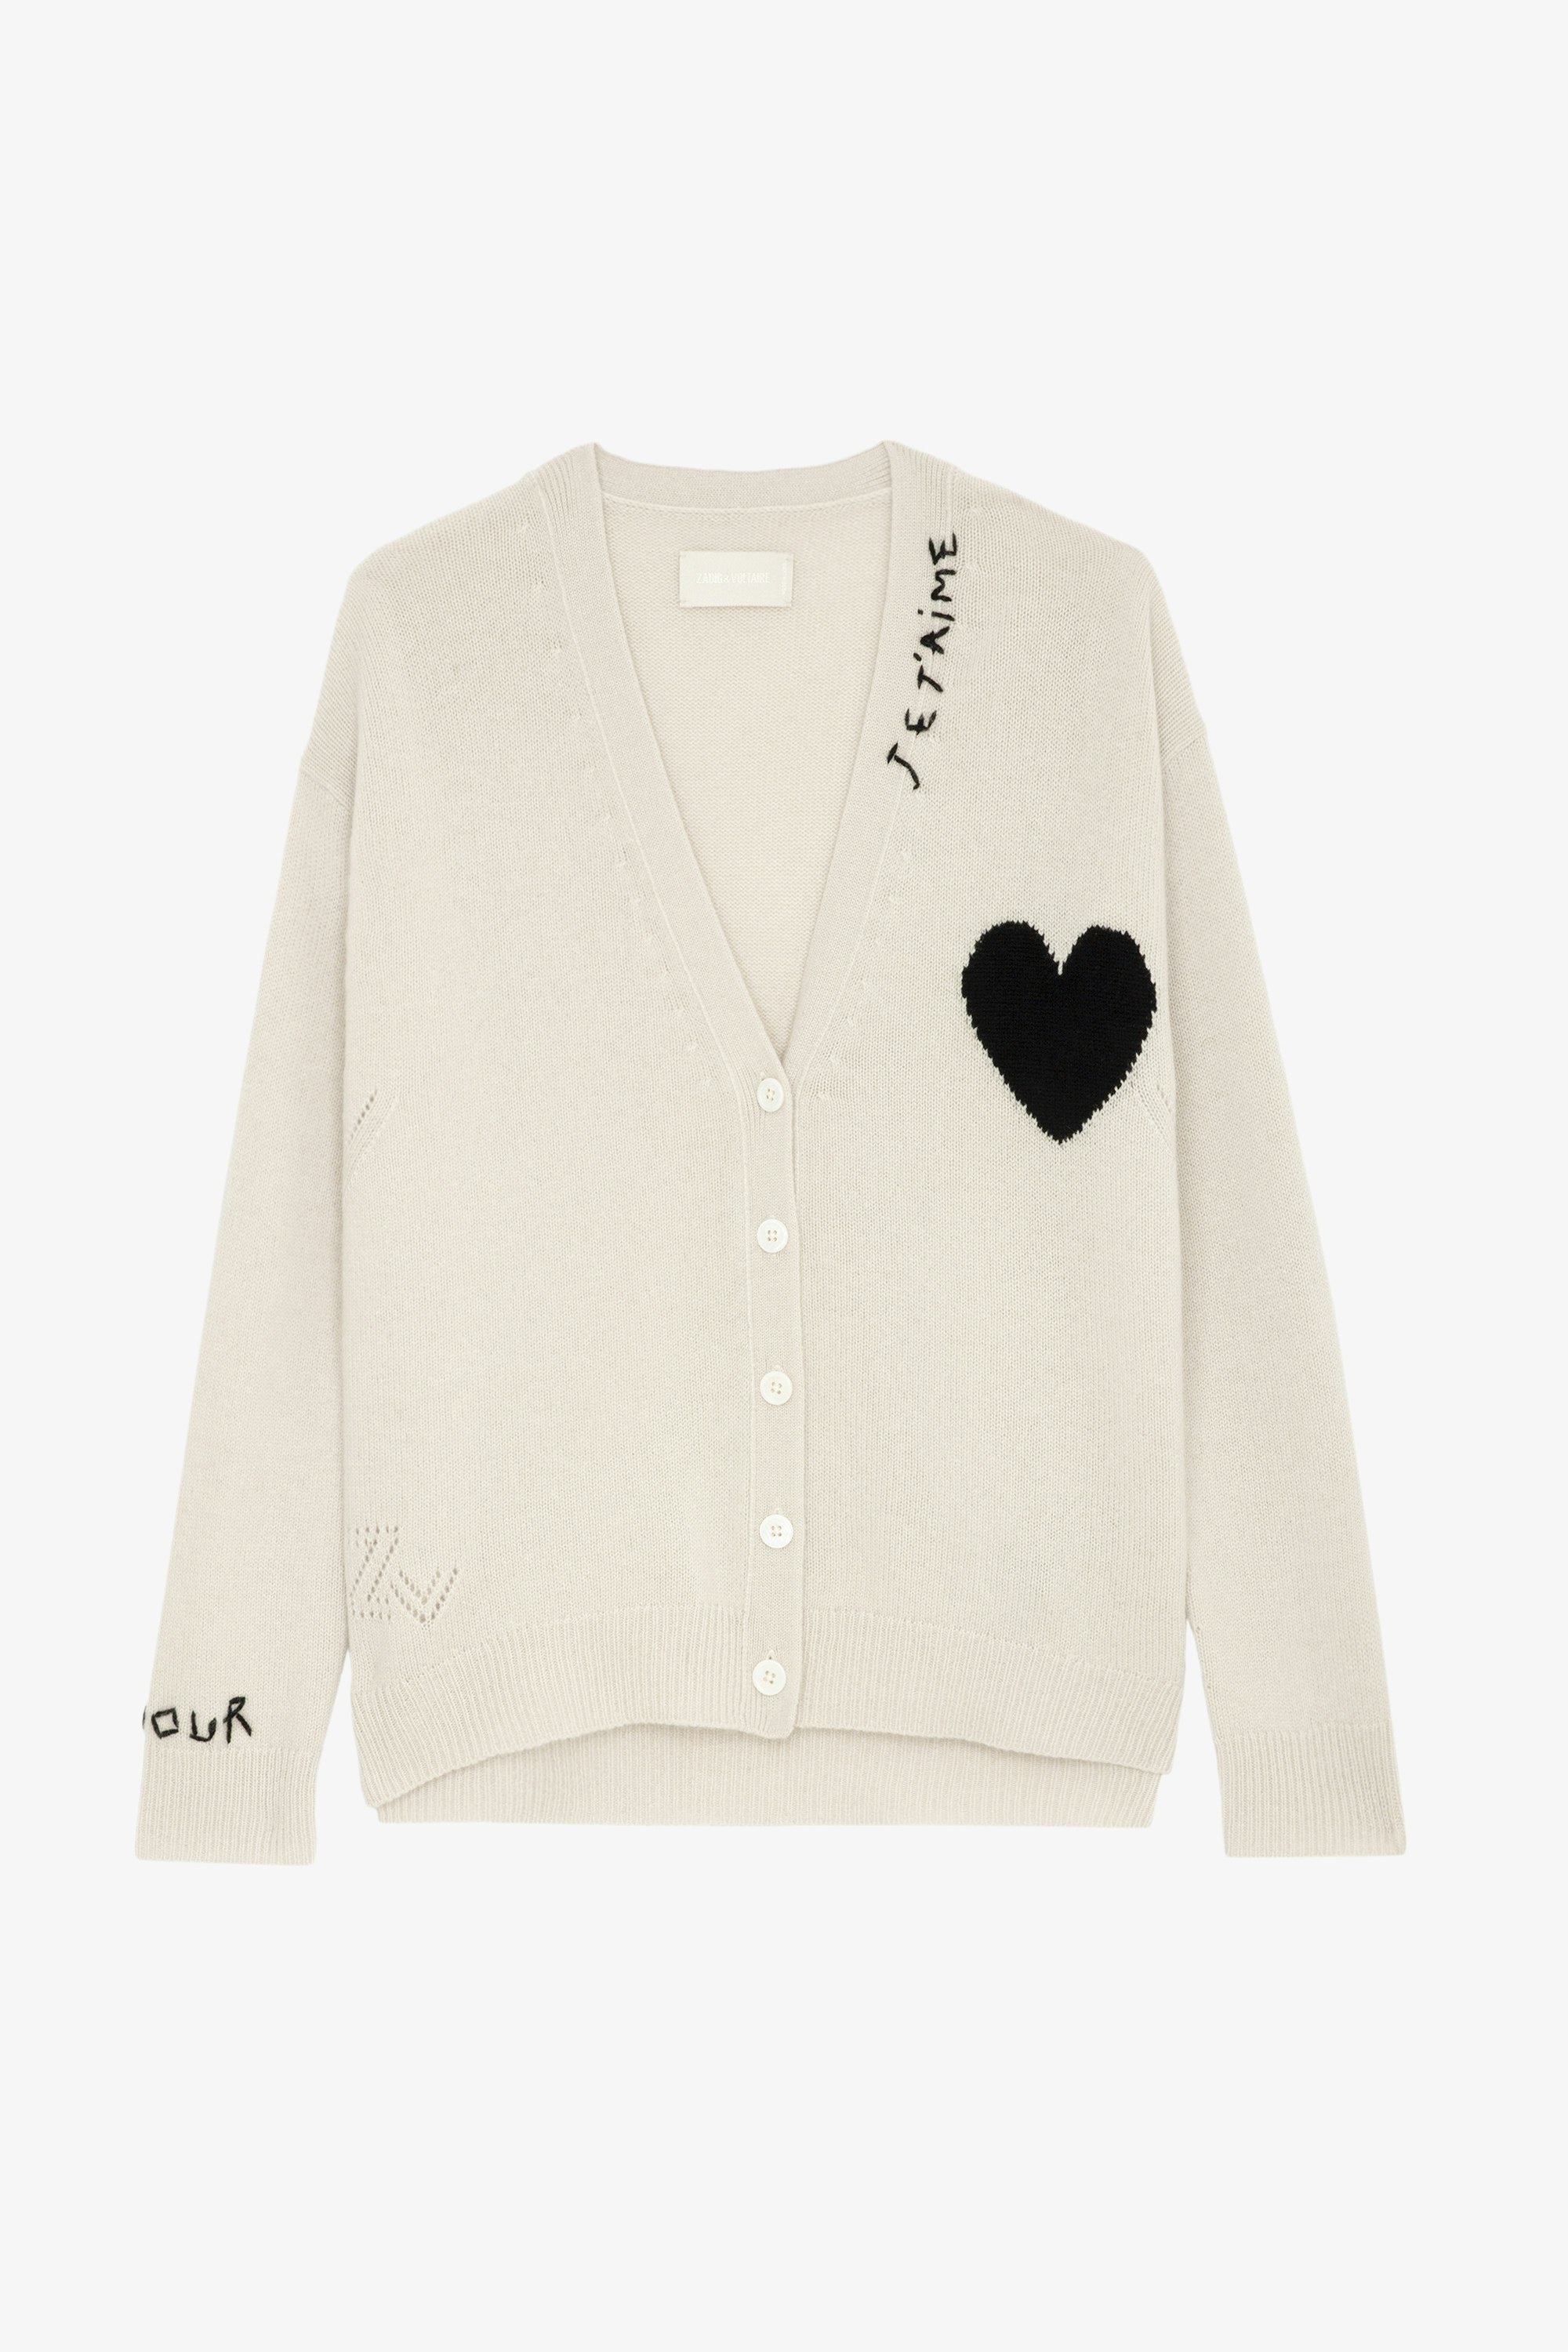 Mirka Cashmere Cardigan - Ecru cashmere buttoned cardigan with long sleeves, motifs and slogans.